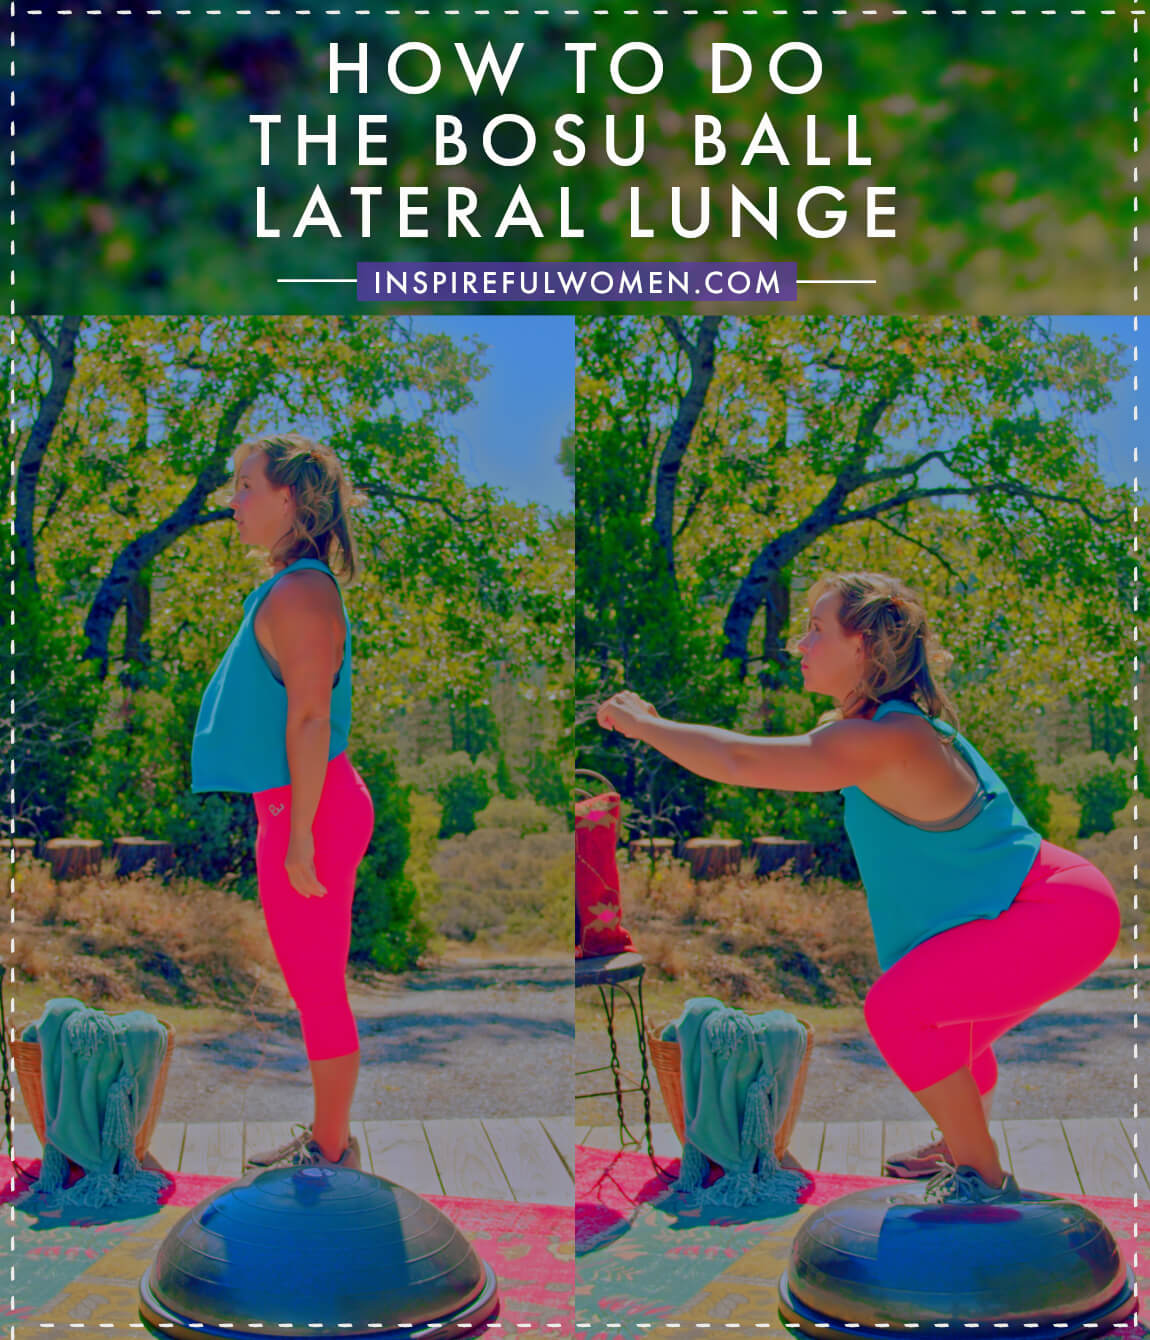 how-to-bosu-lateral-lunge-squat-alternative-inner-thigh-quad-adductor-glute-exercise-proper-form